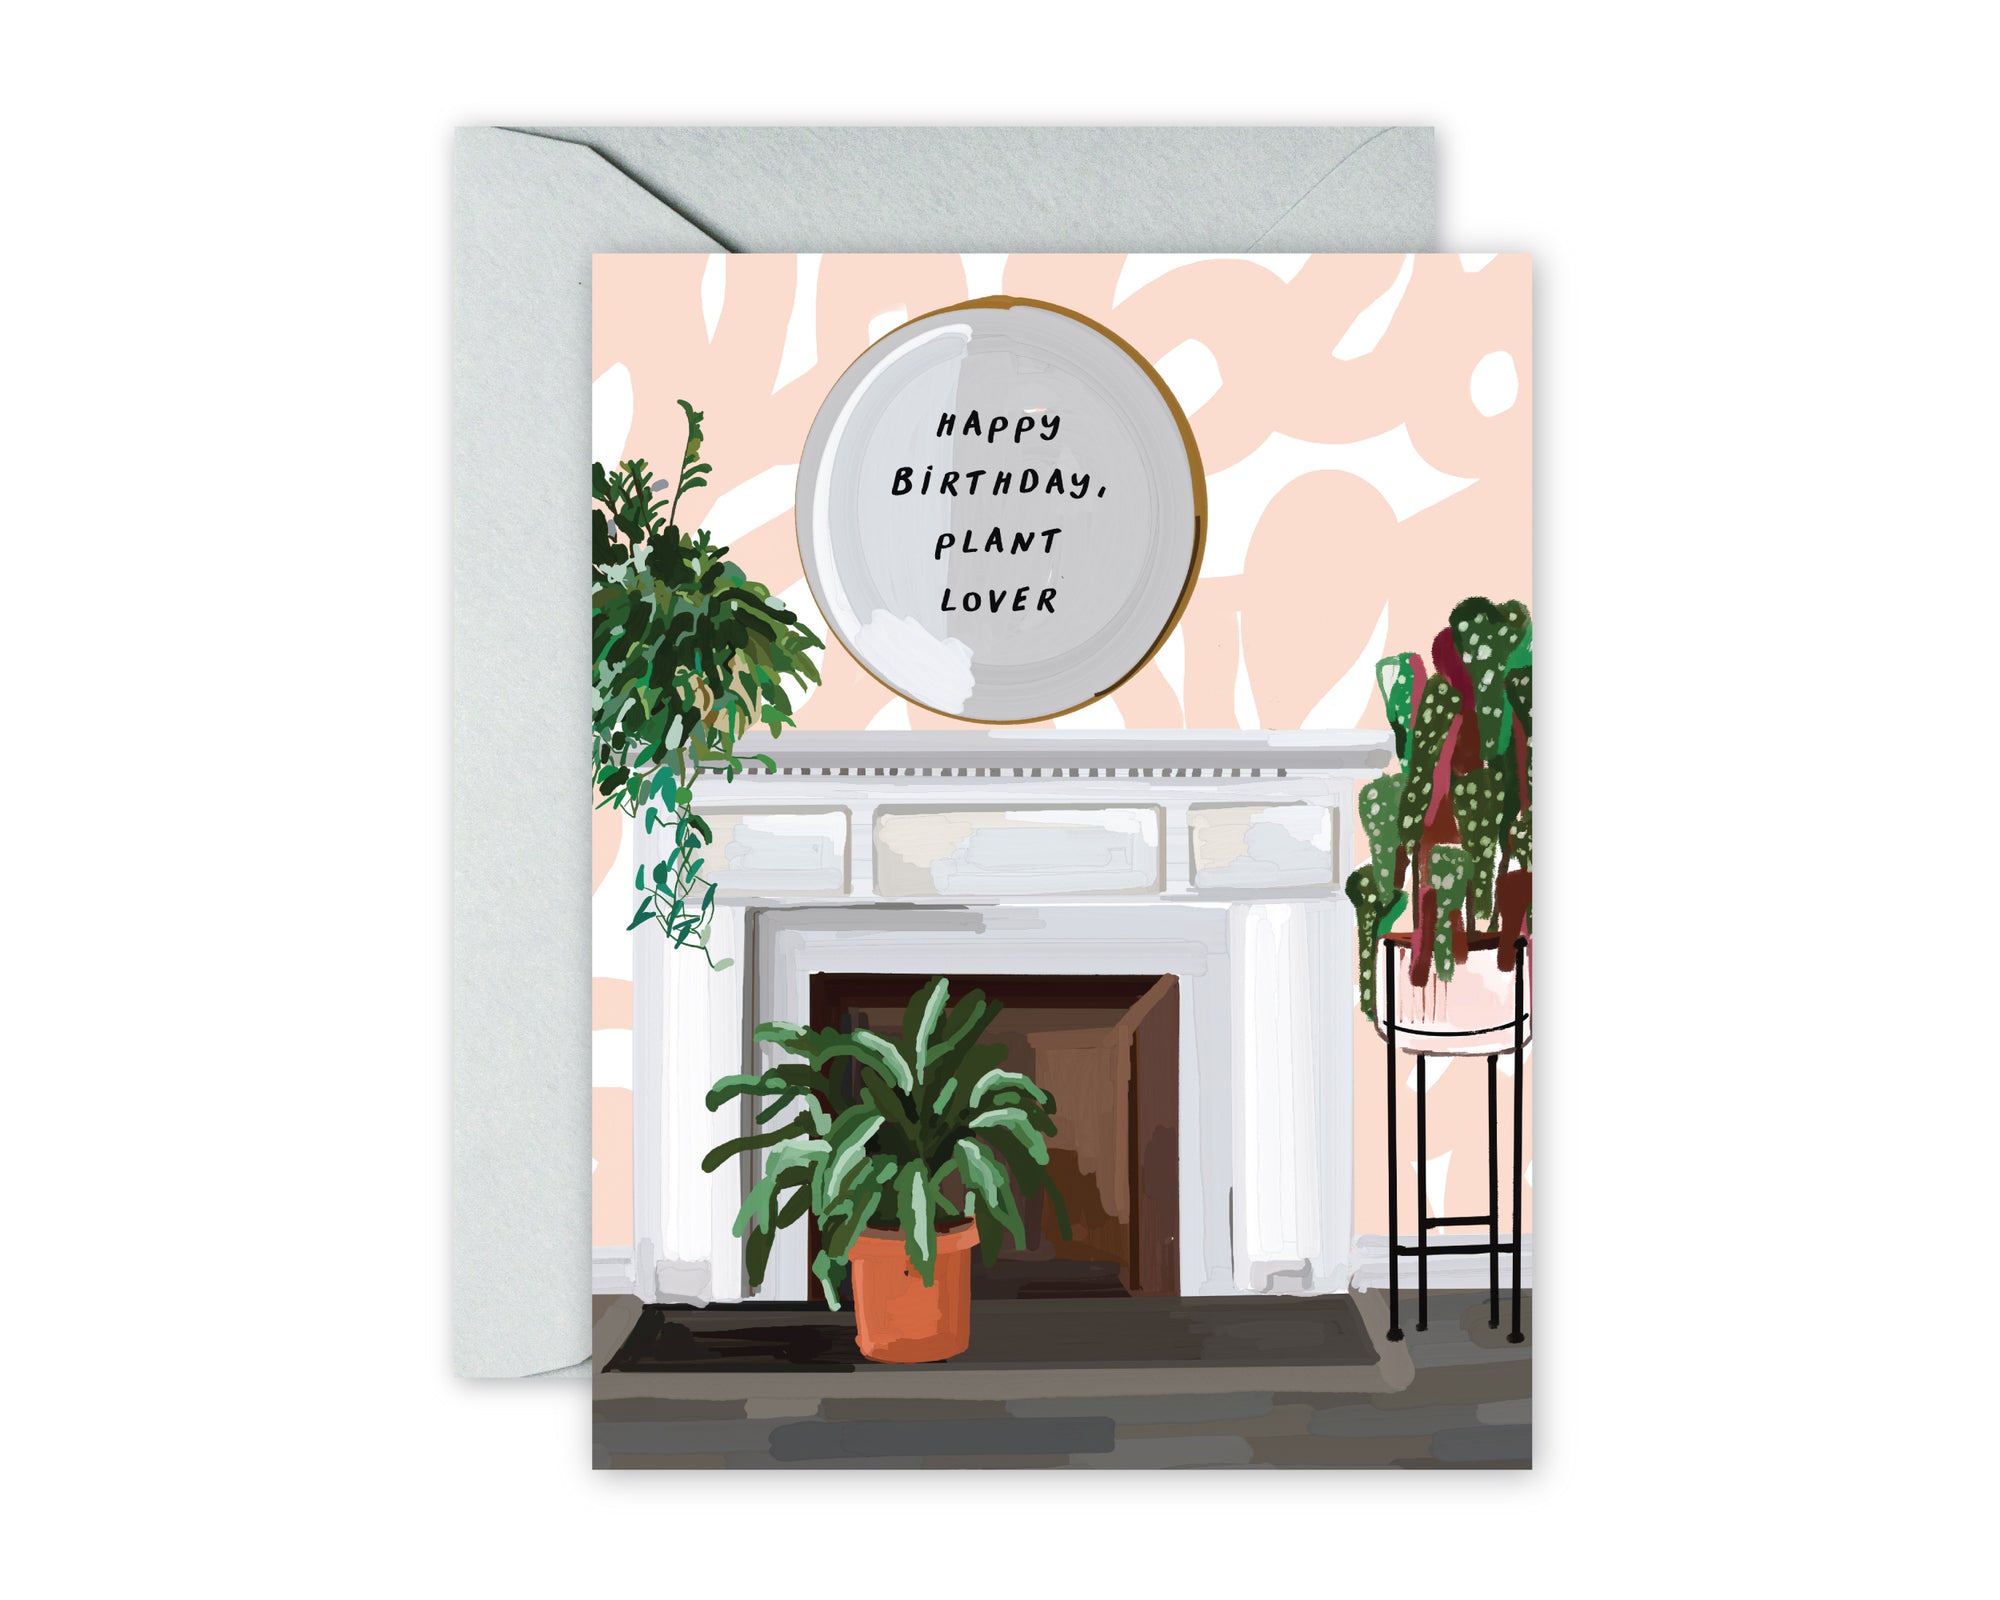 Greeting card with illustrated fireplace scene. Fireplace, pink swirl wallpaper, modern mirror with text overlay HAPPY BIRTHDAY, PLANT LOVER. Plants bordering fireplace. Grey envelope.